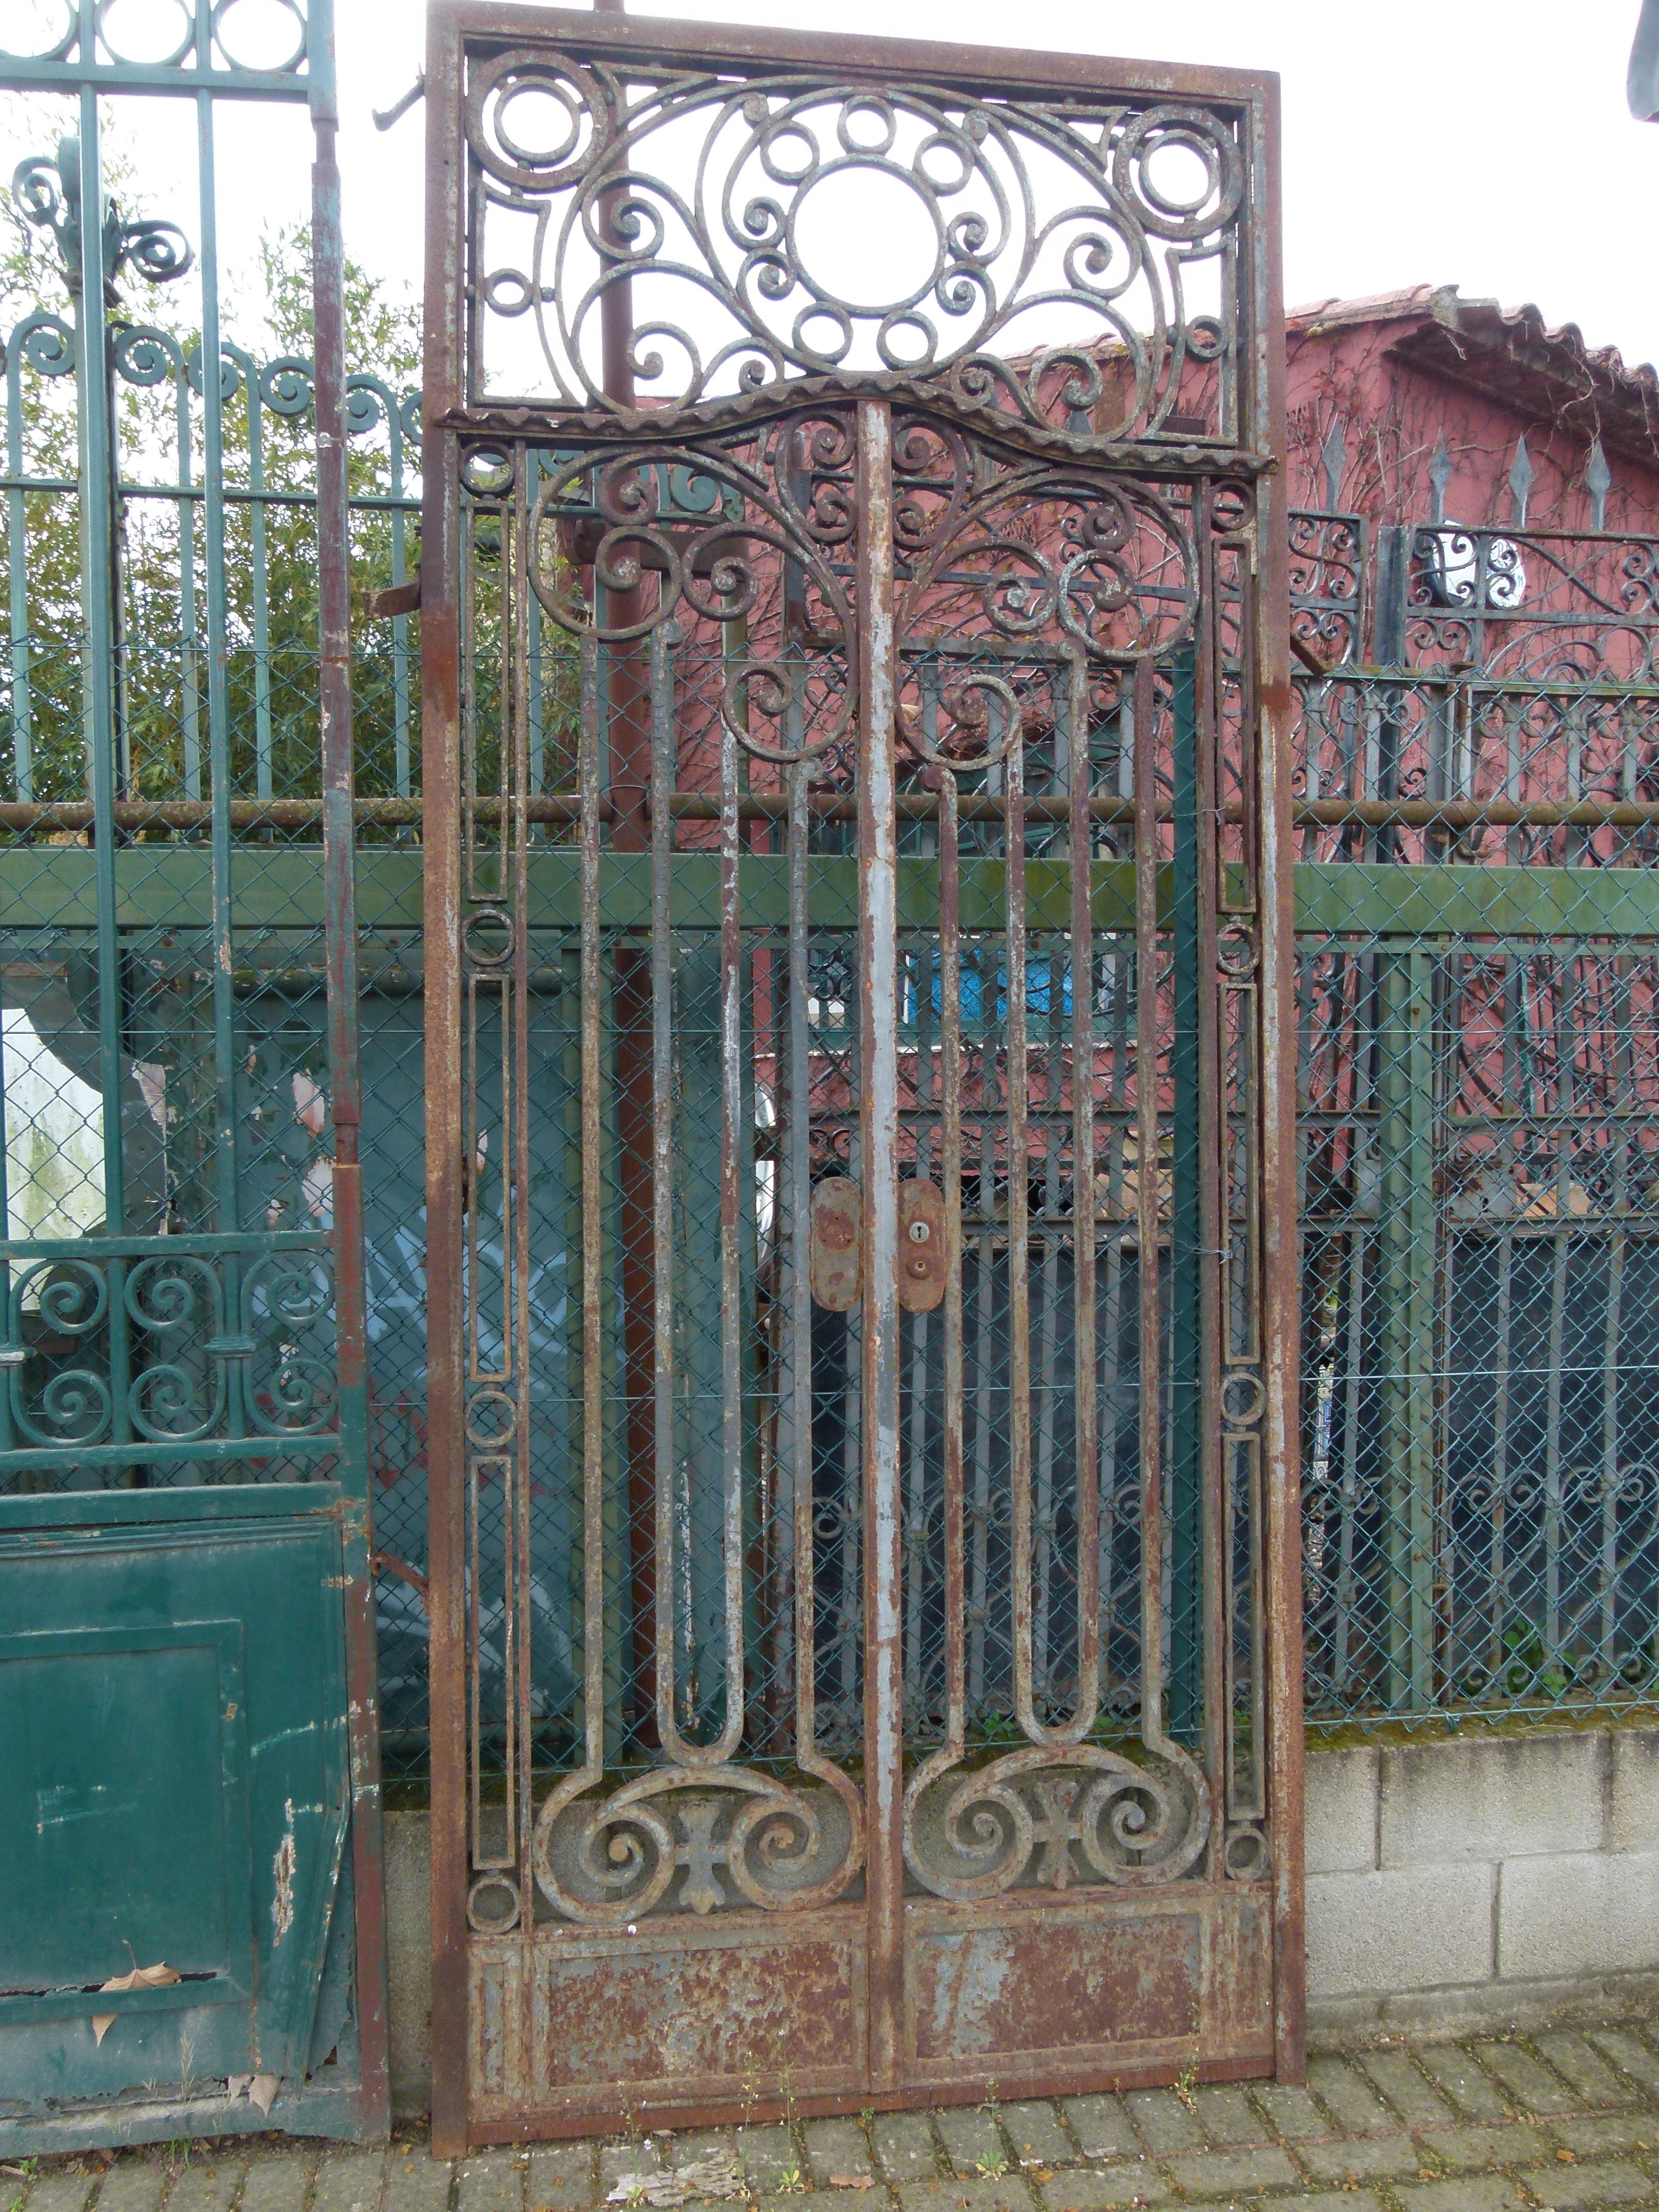 Late 18th Century Garden Front Gate. Original patina and rusty surface.
Framed door and assembled with rivets, since the method of welding in this period was not yet used.
 